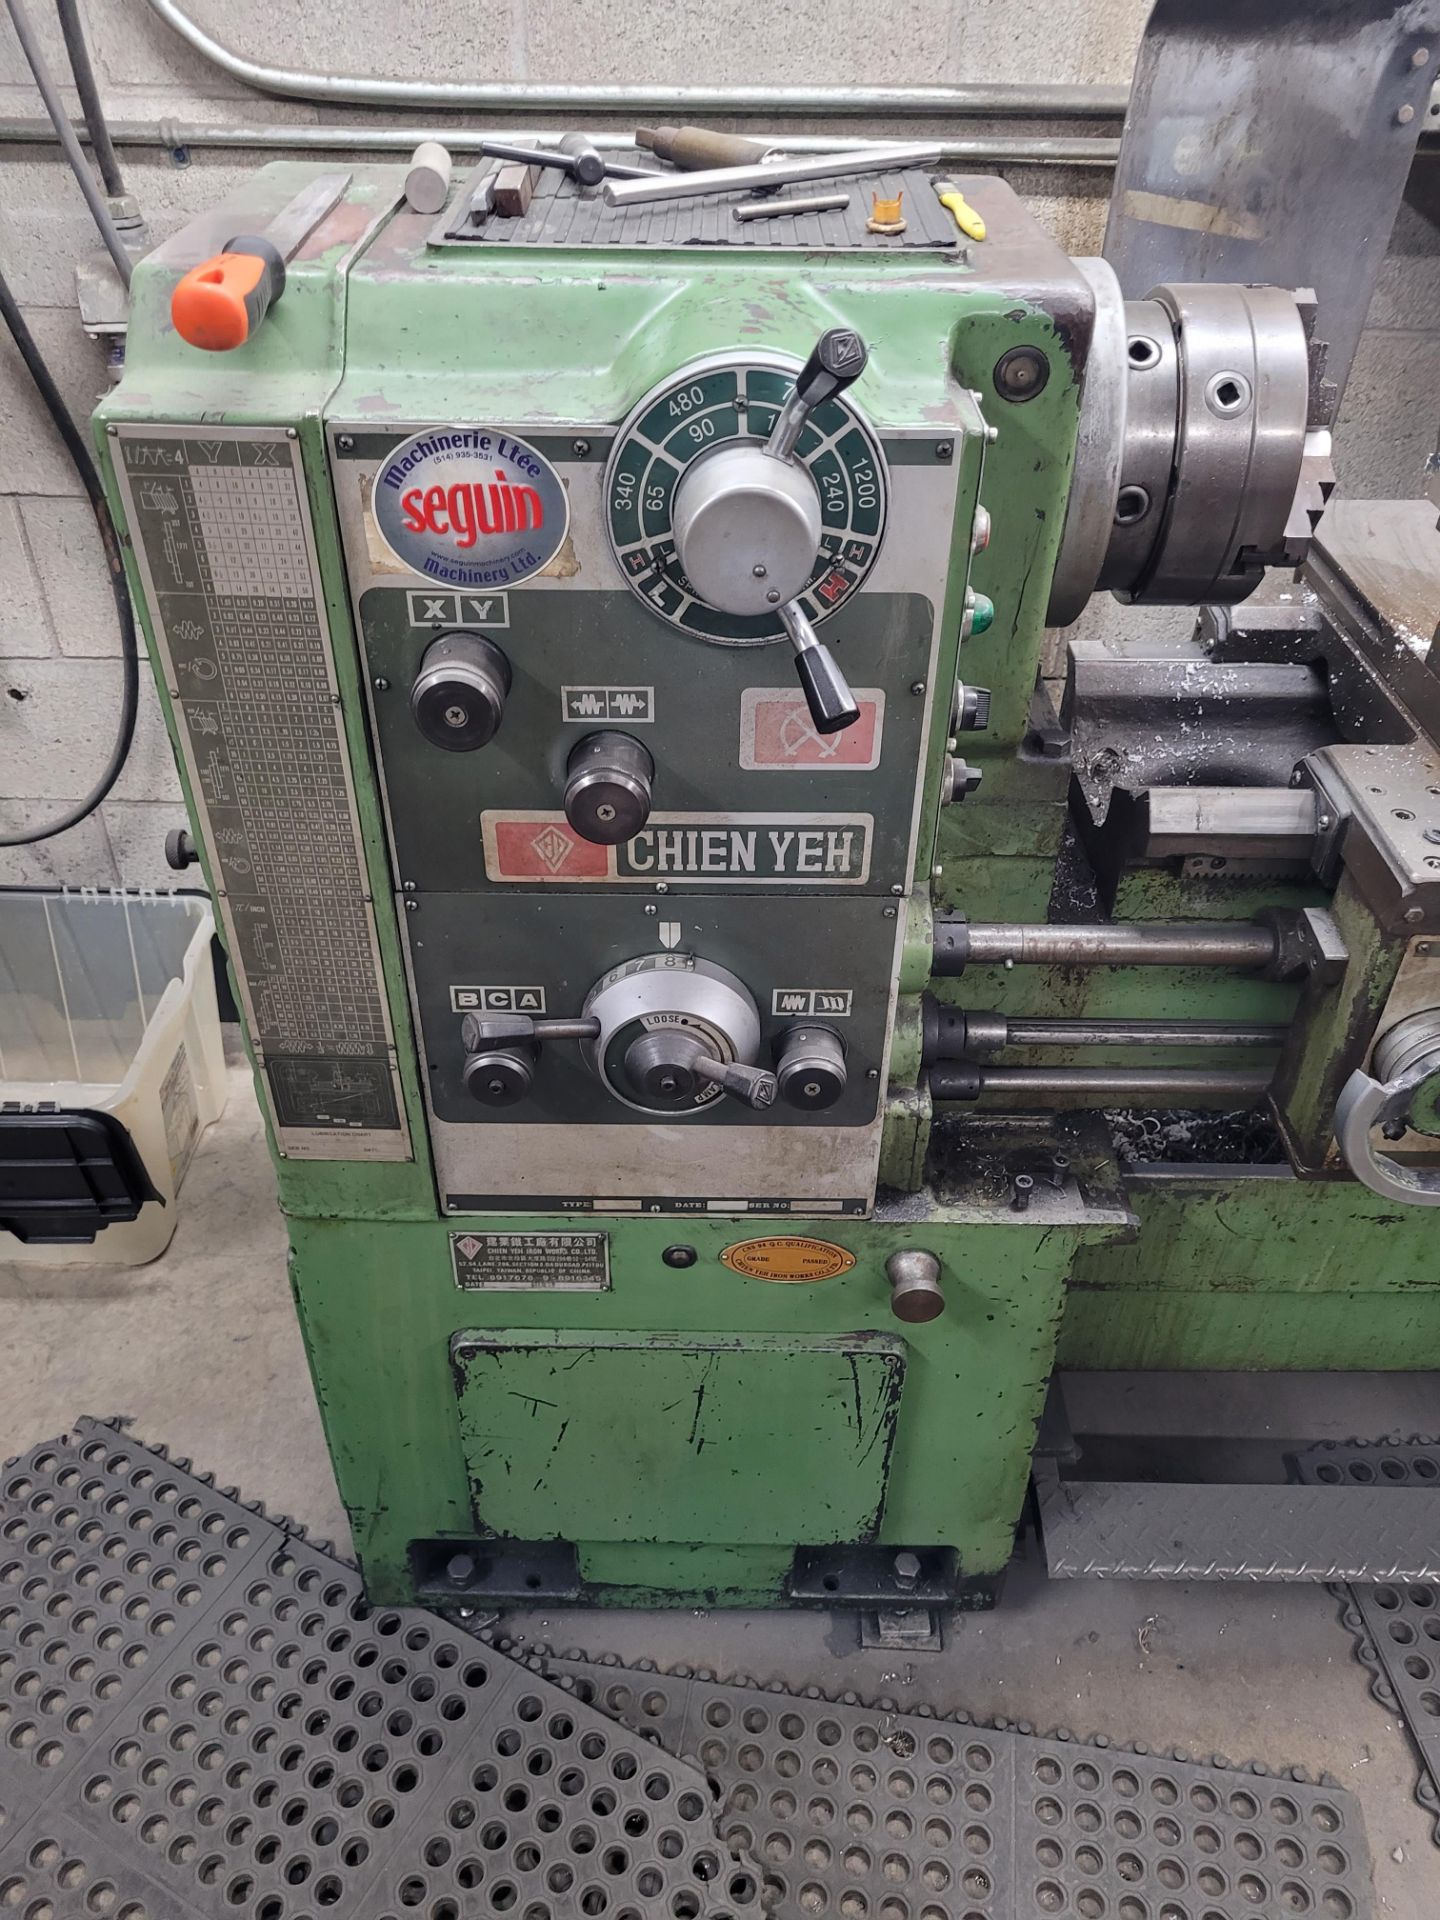 CHIEN YIEH Lathe mod. CY405Gx1000 - Image 7 of 18